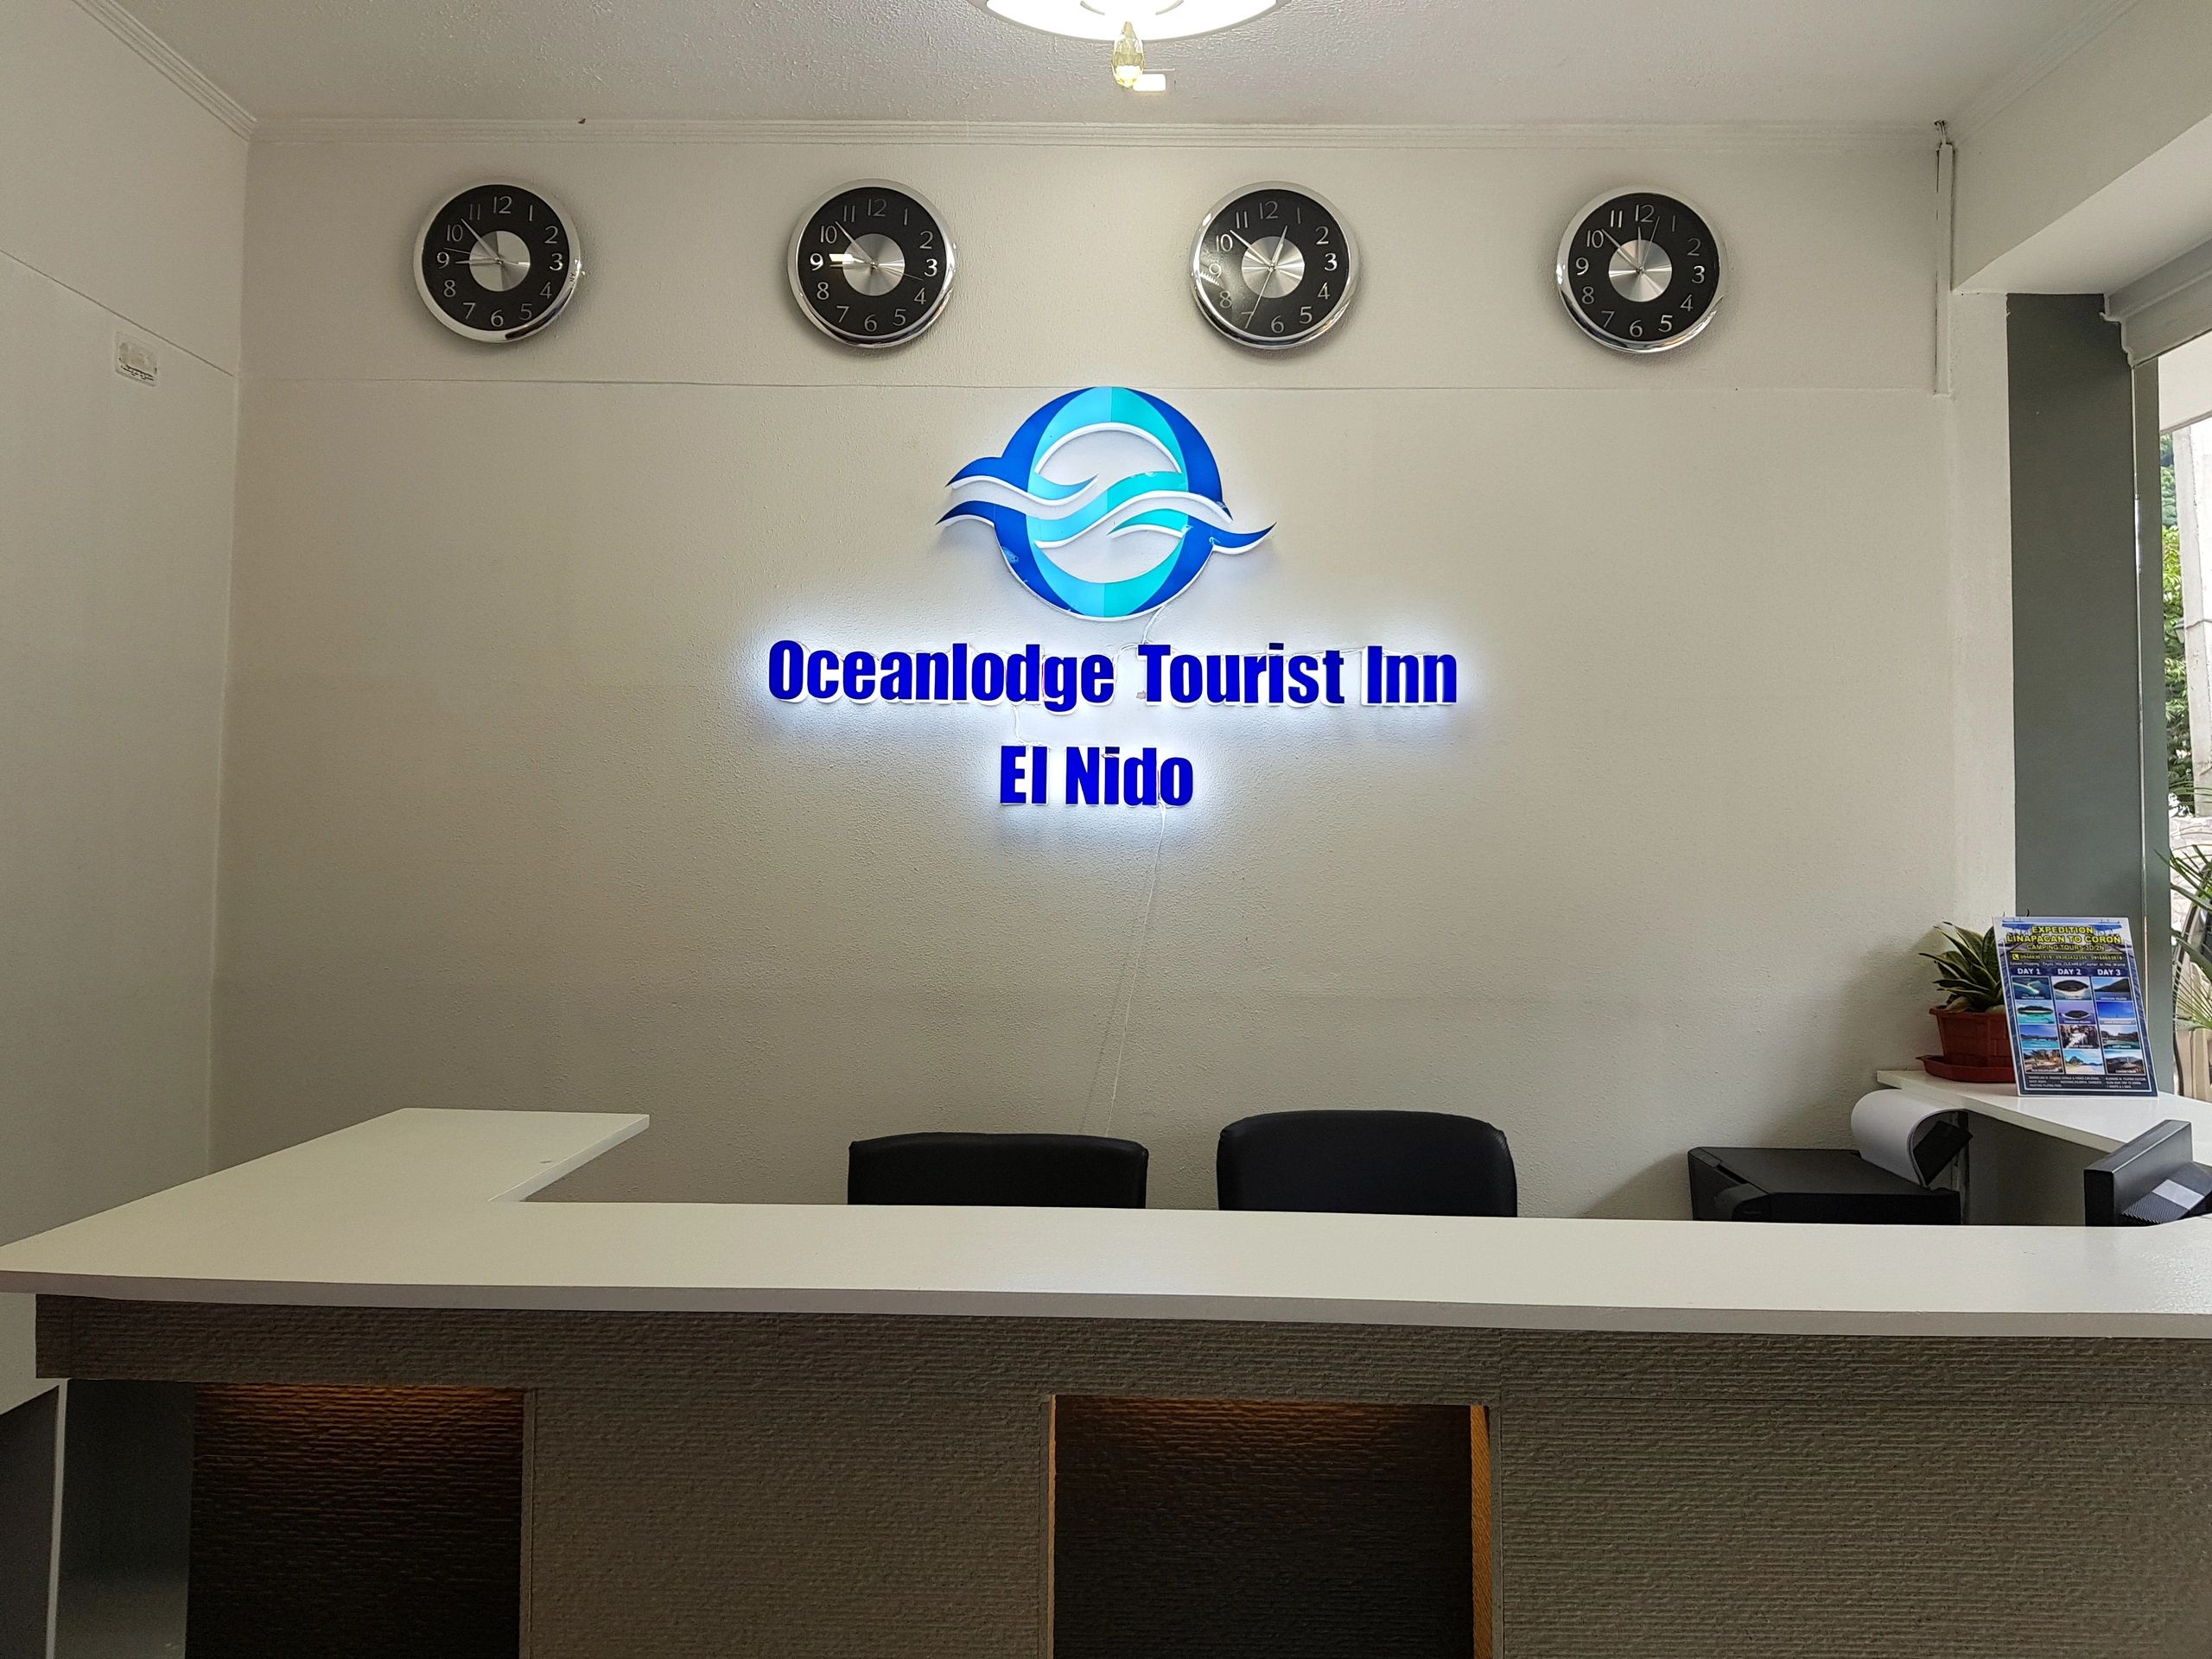 OCEANLODGE TOURIST INN PROMO B: WITH AIRFARE VIA-PPS  ALL IN elnido Packages